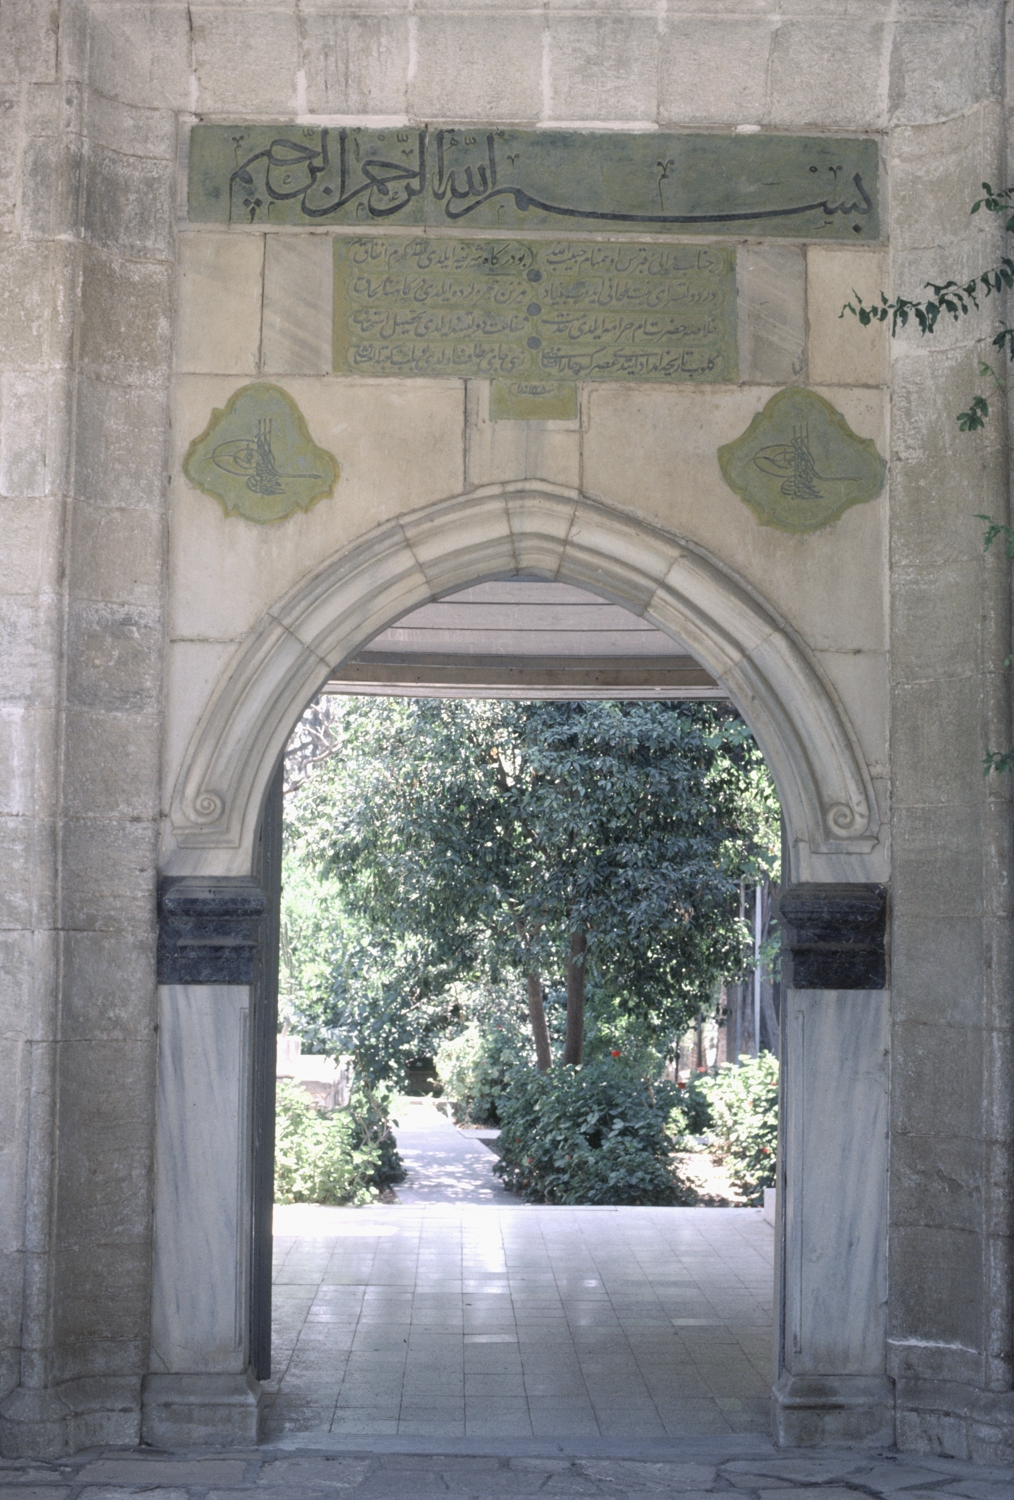 Detail of entrance, with inscription and tughras of Mahmut II